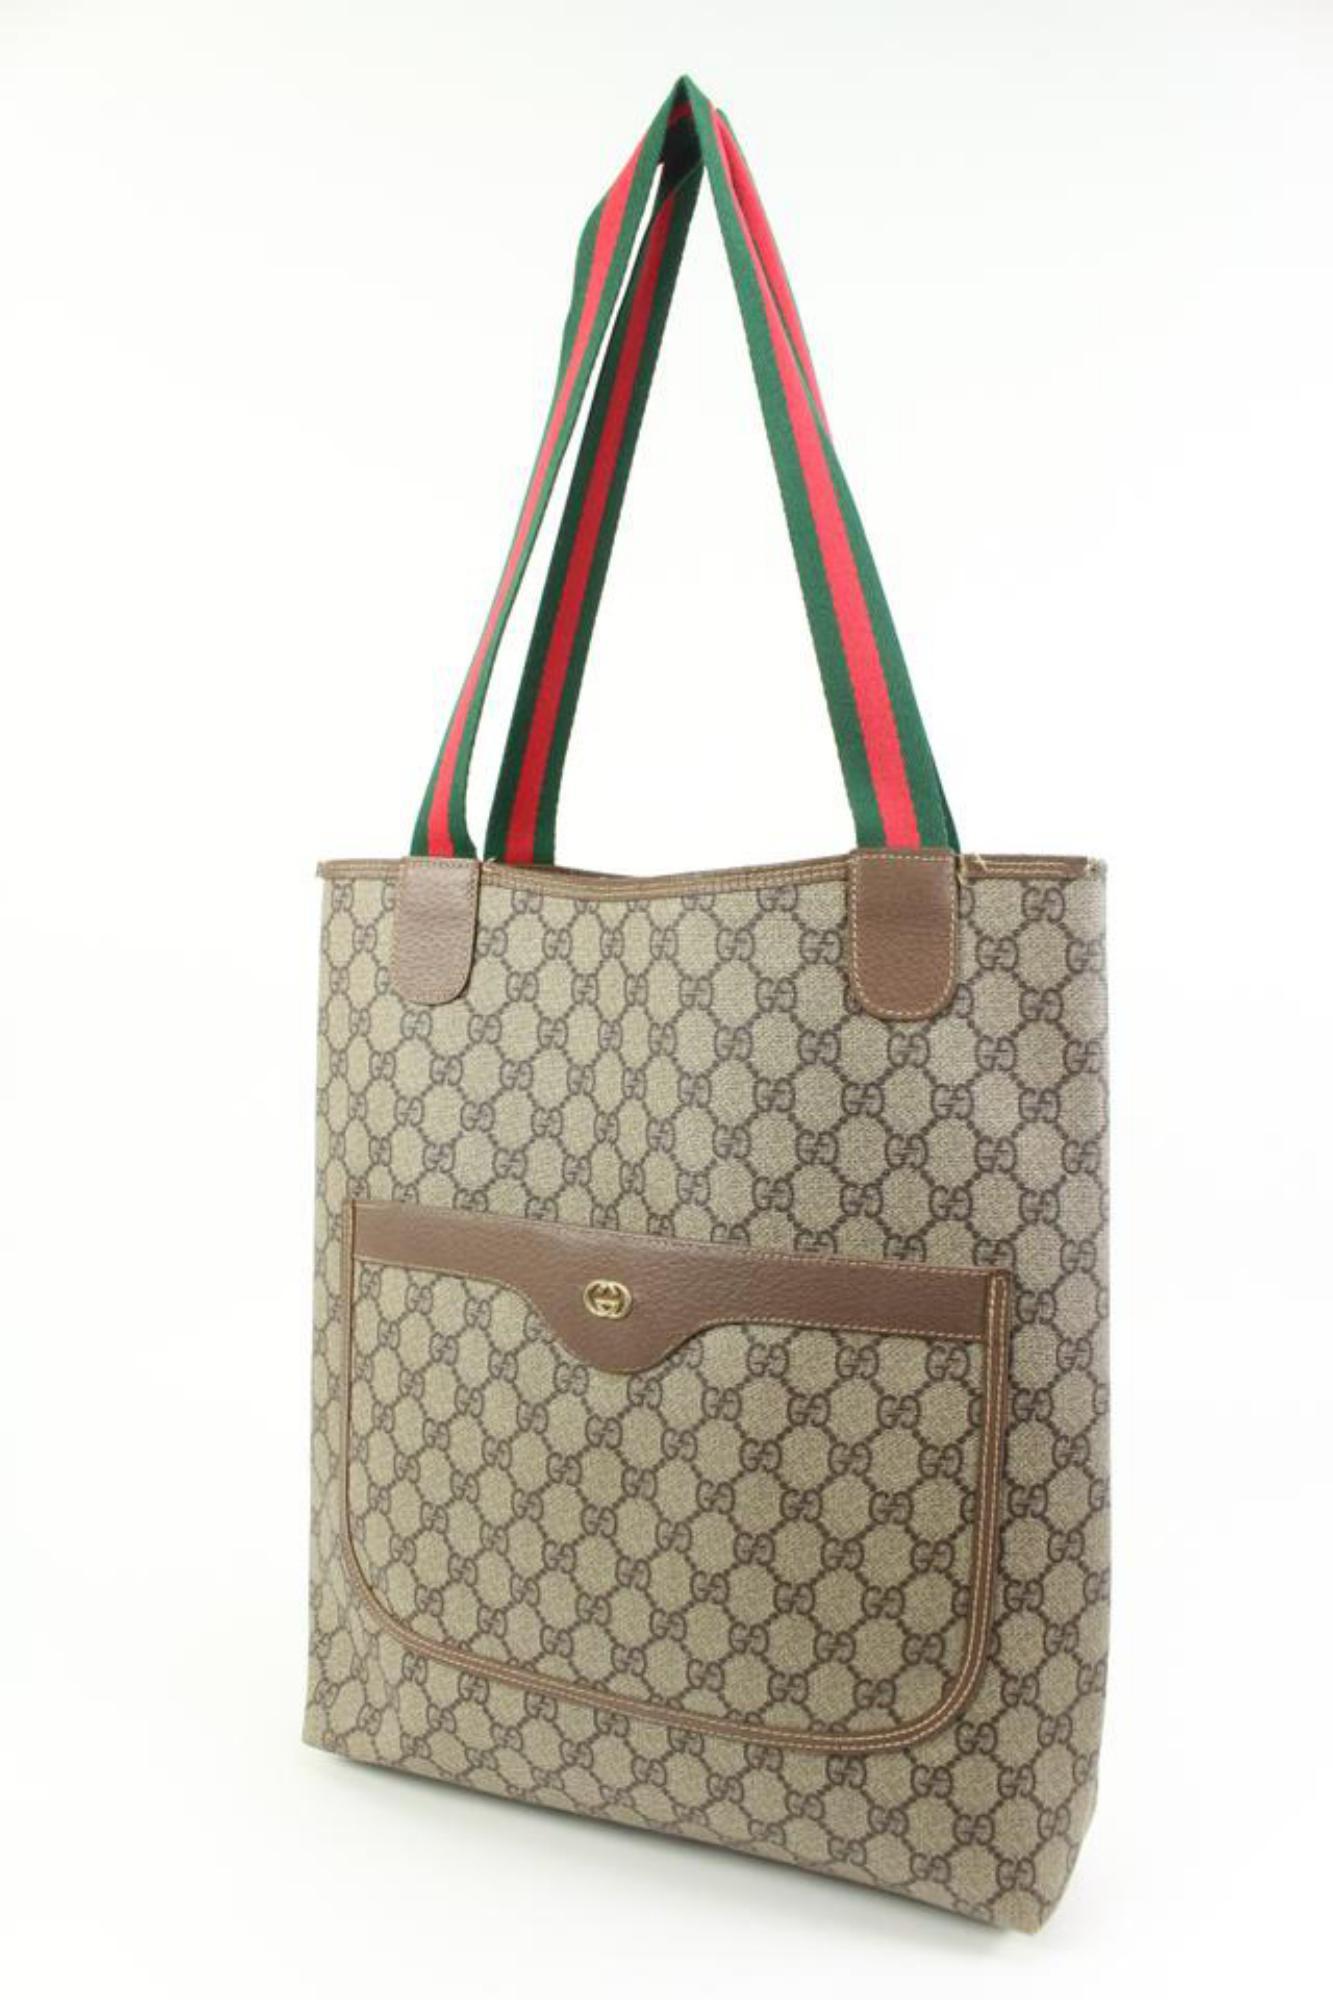 Gucci Supreme GG Web Handle Shopper Tote Bag 74gz411s
Date Code/Serial Number: 002-58-6487 4023
Made In: Italy
Measurements: Length:  14